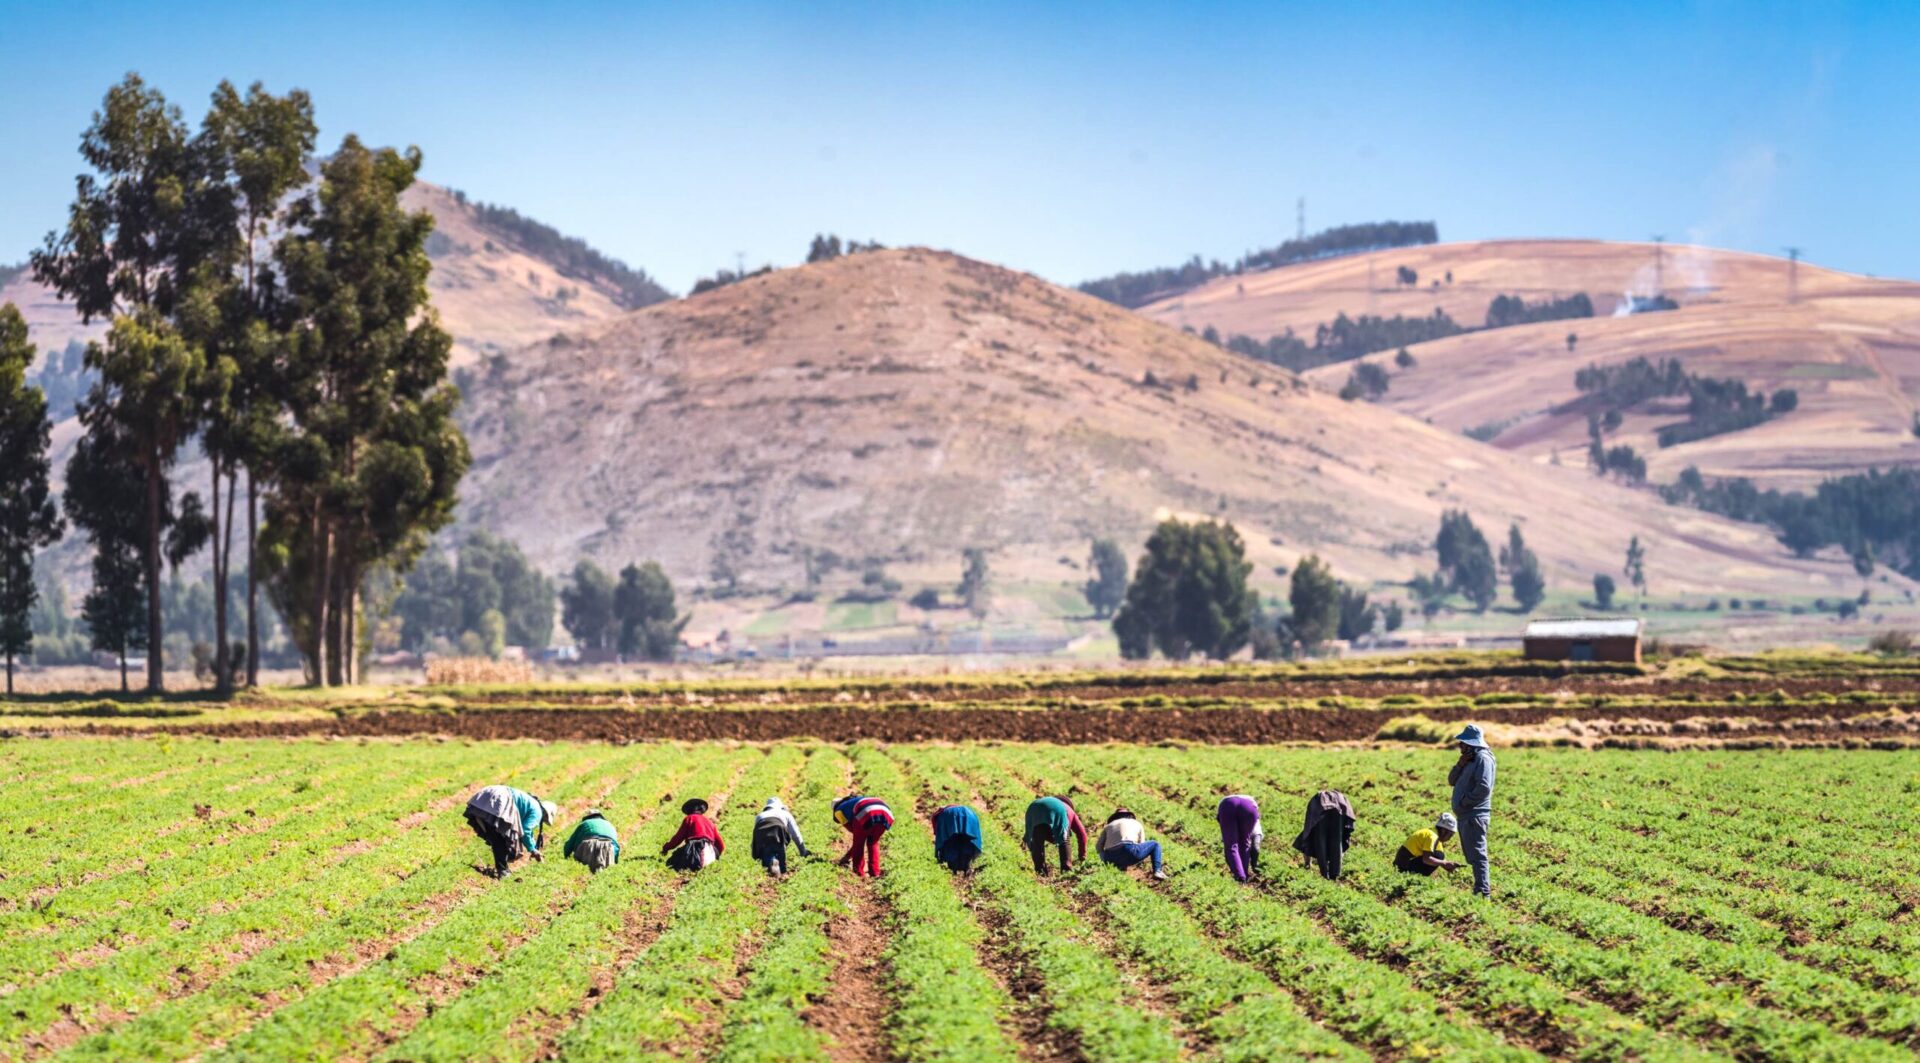 Farmers in the Andes. Credit: Christian Vinces - Shutterstock.com